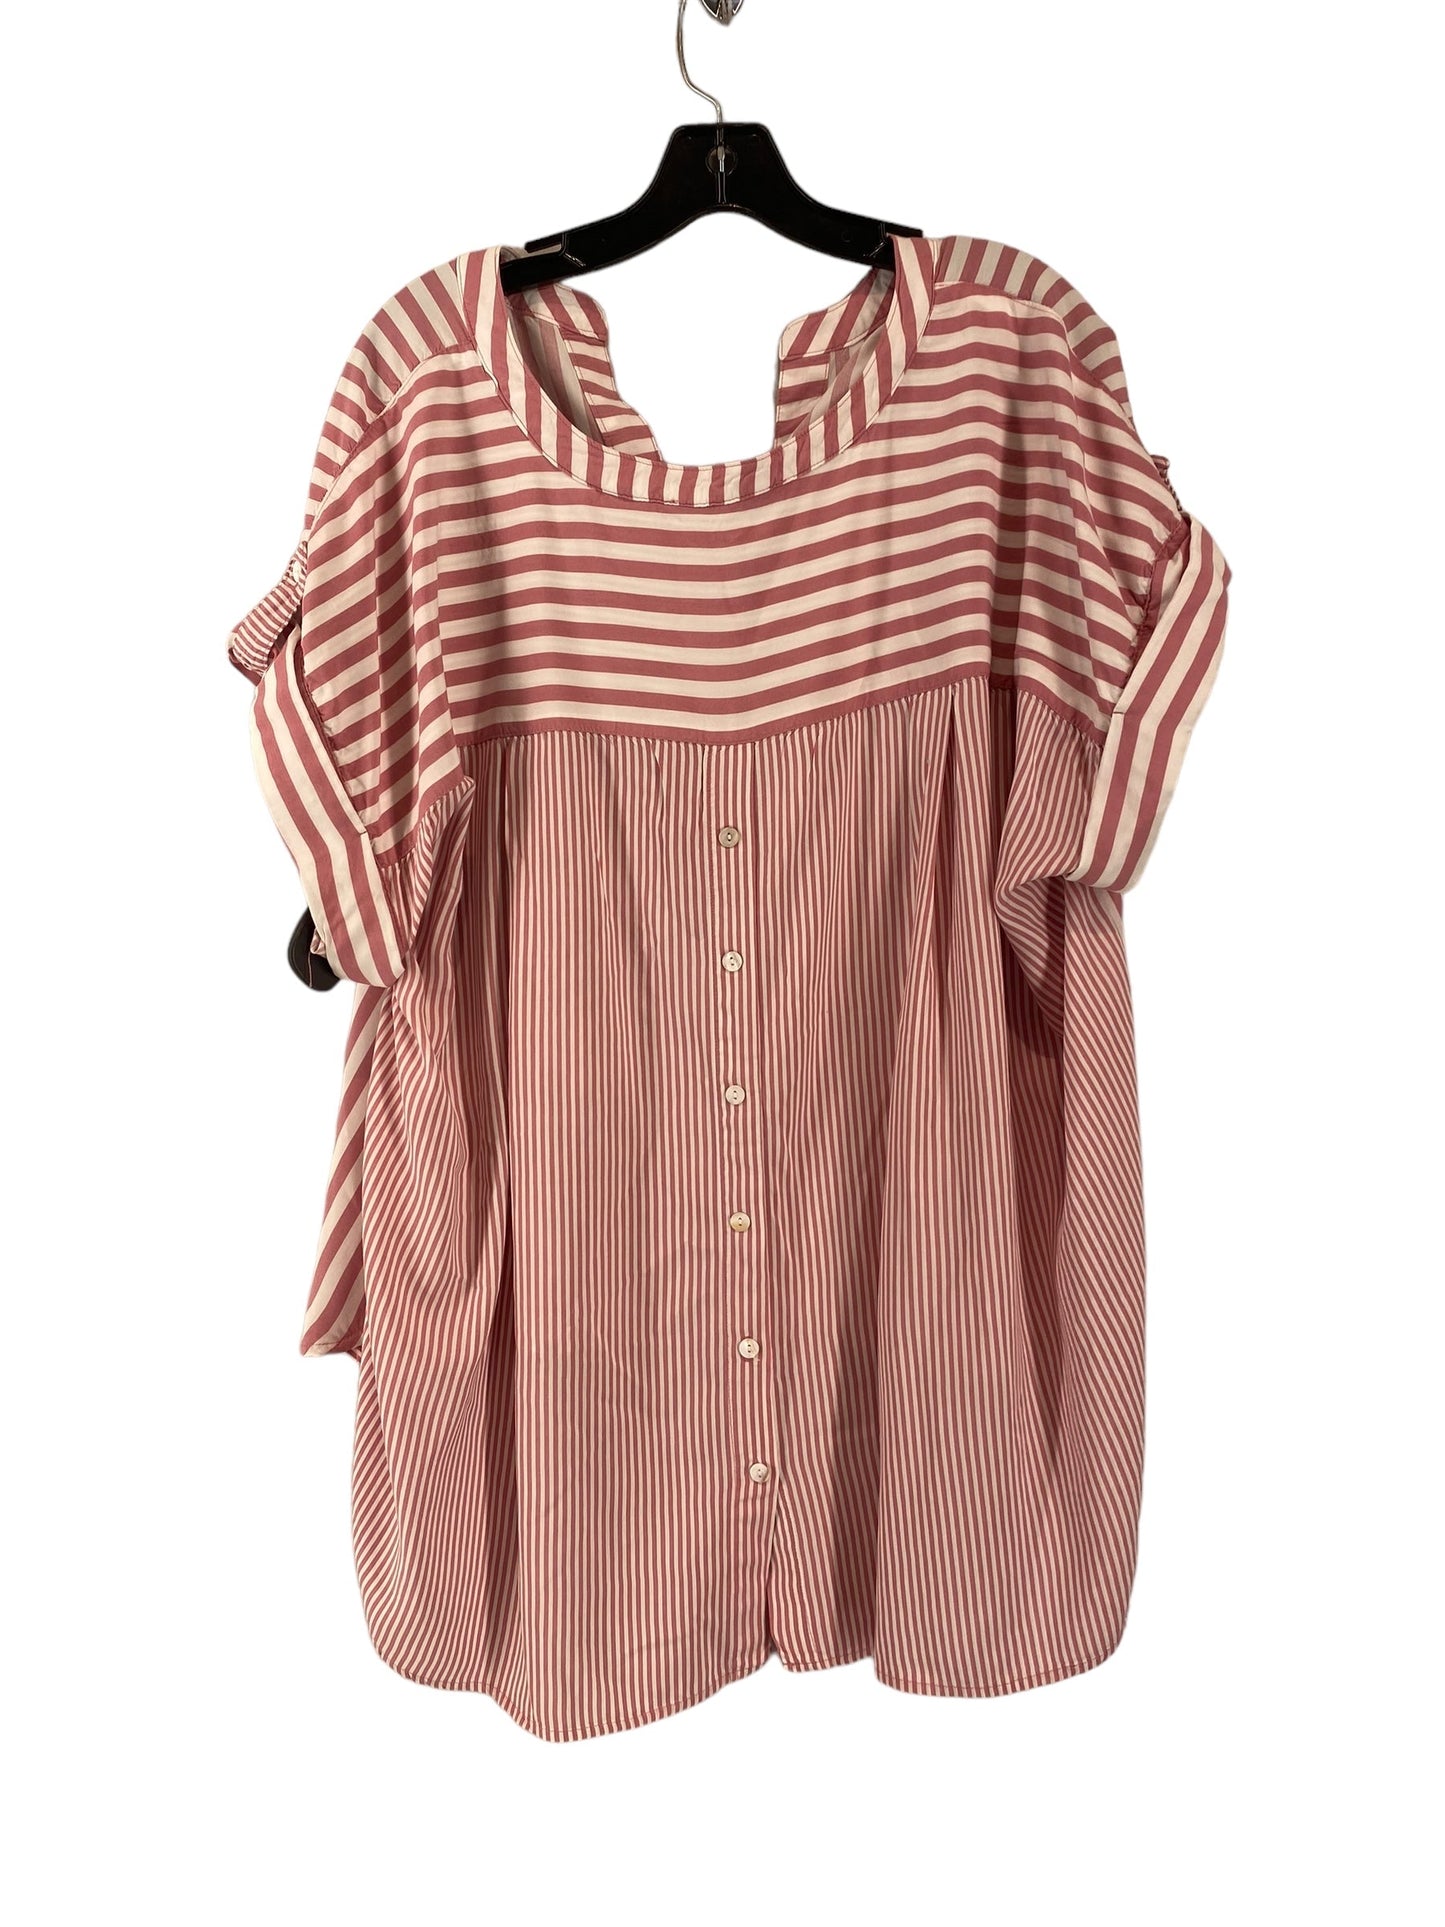 Striped Pattern Blouse Short Sleeve Jane And Delancey, Size Xxl